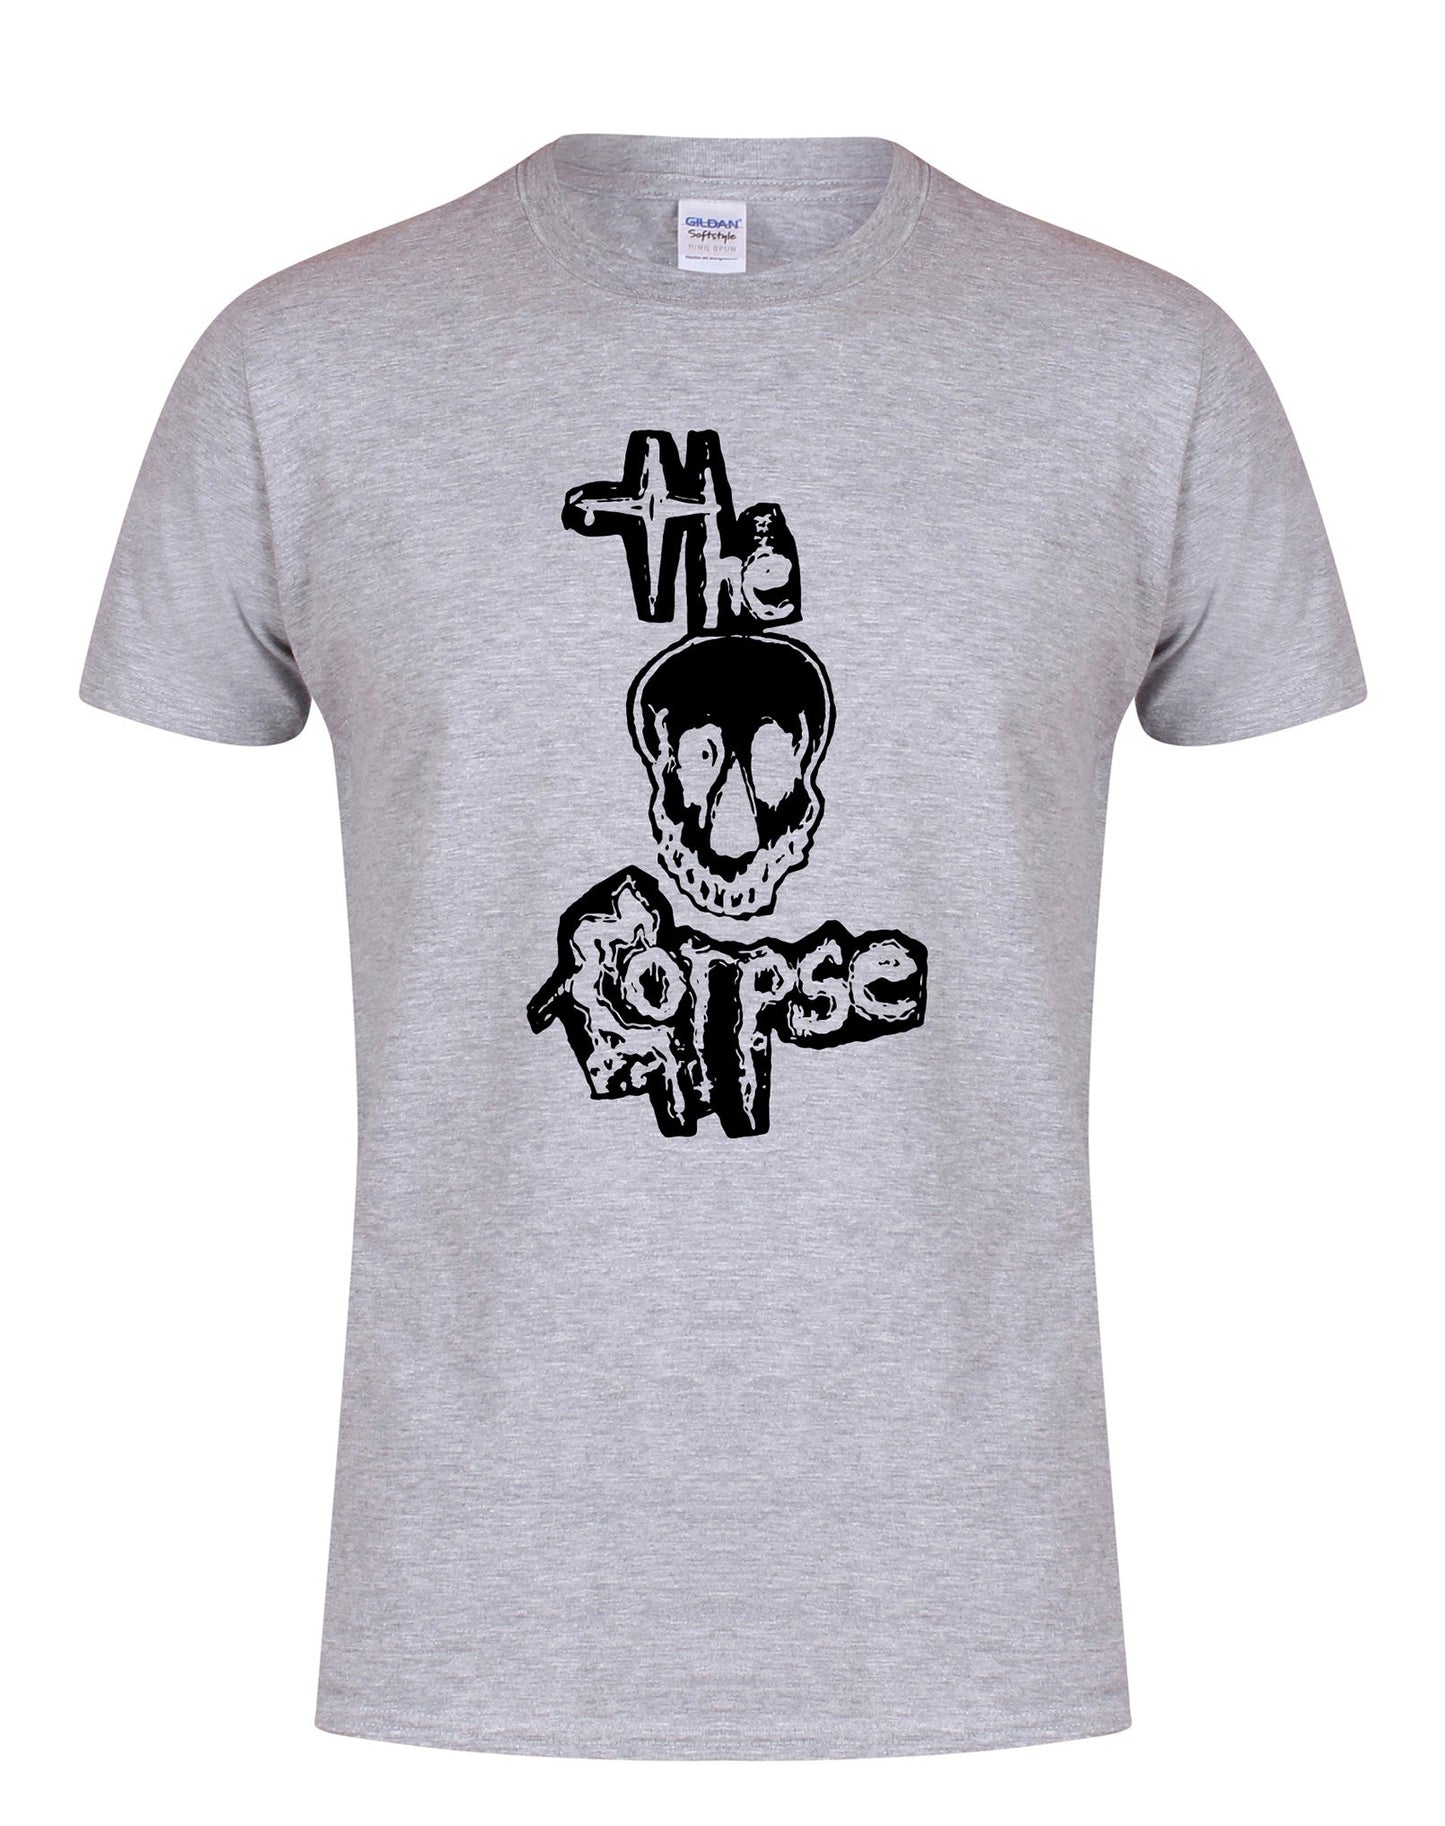 The Corpse unisex fit T-shirt - various colours - Dirty Stop Outs